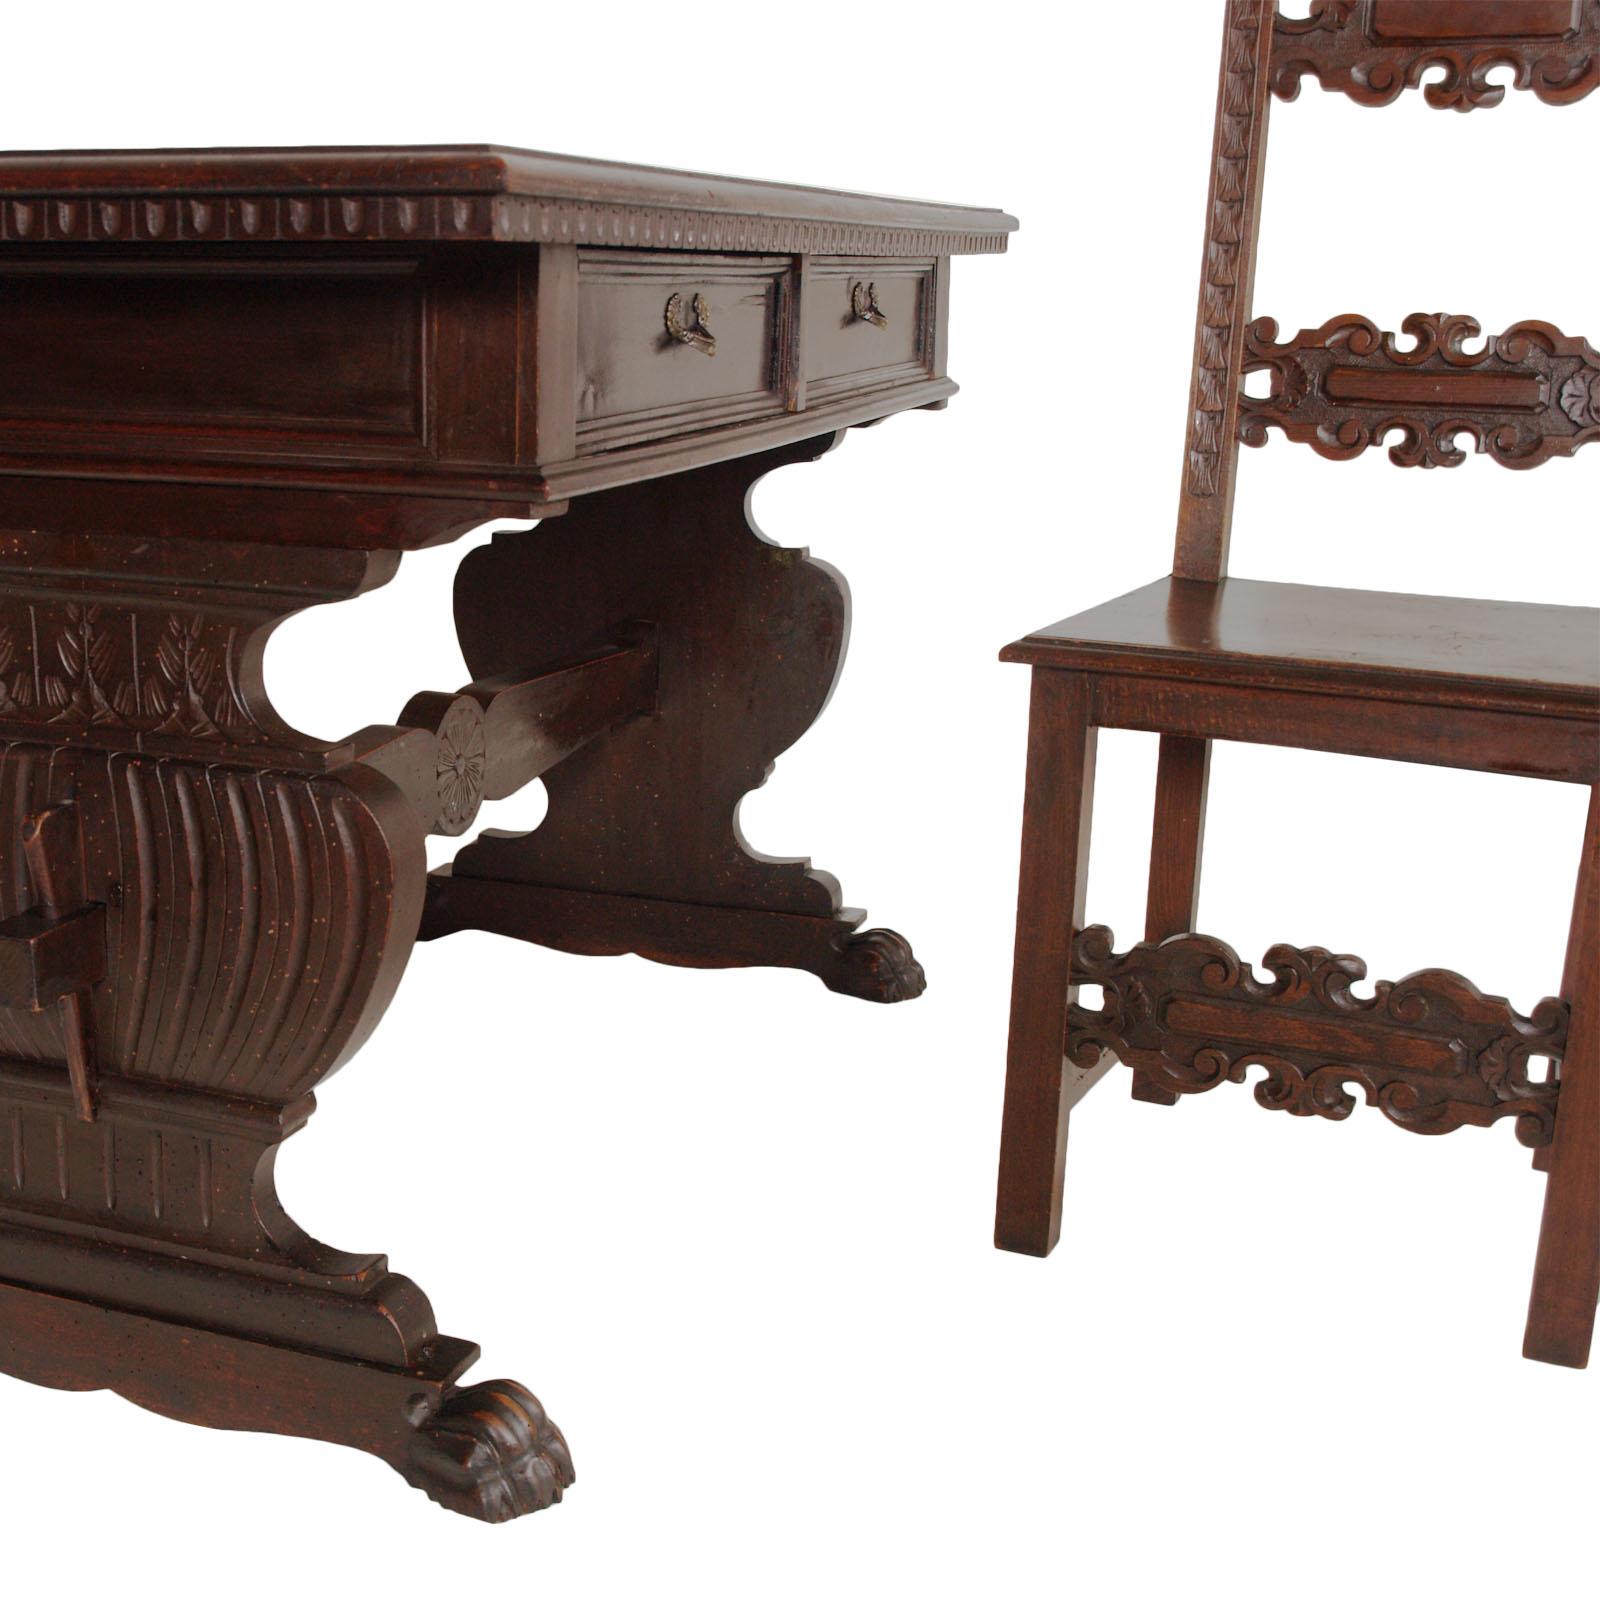 Italian Mid-19th Century Tuscan Renaissance Antique Table Desk Hand Carved Solid Walnut For Sale